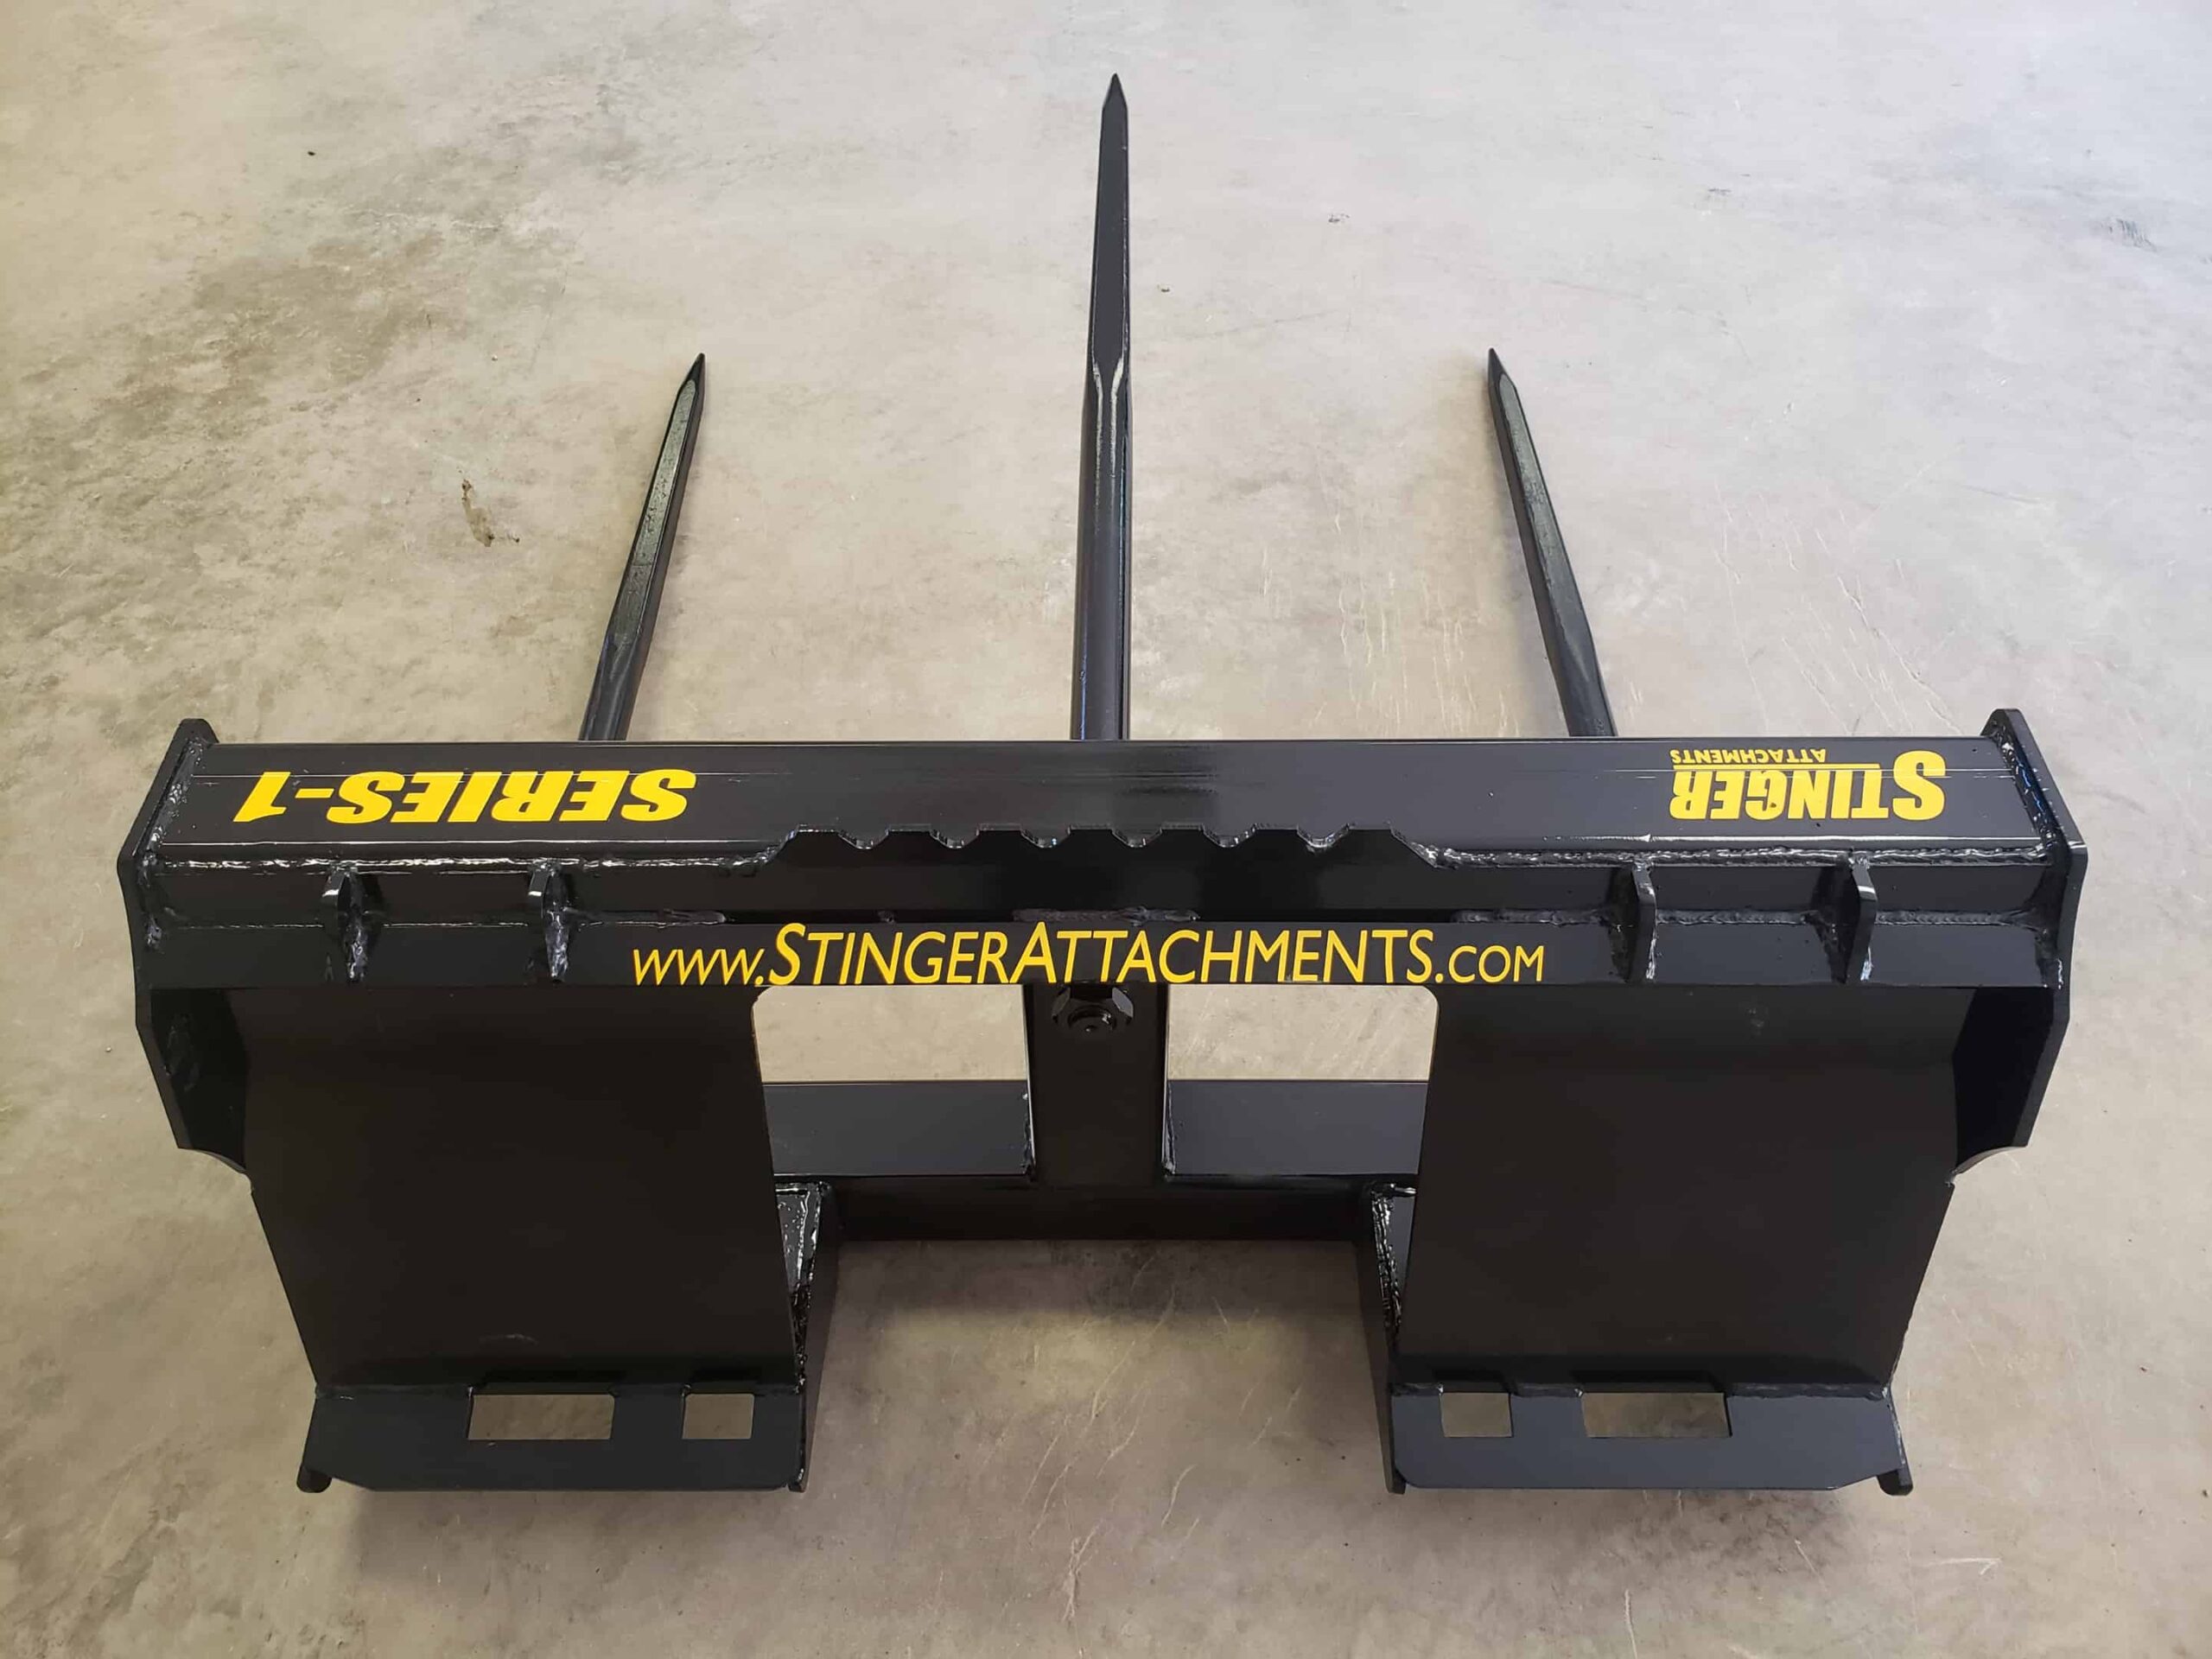  Neat Attachments Skid Steer Attachment, 49 Hay Bale